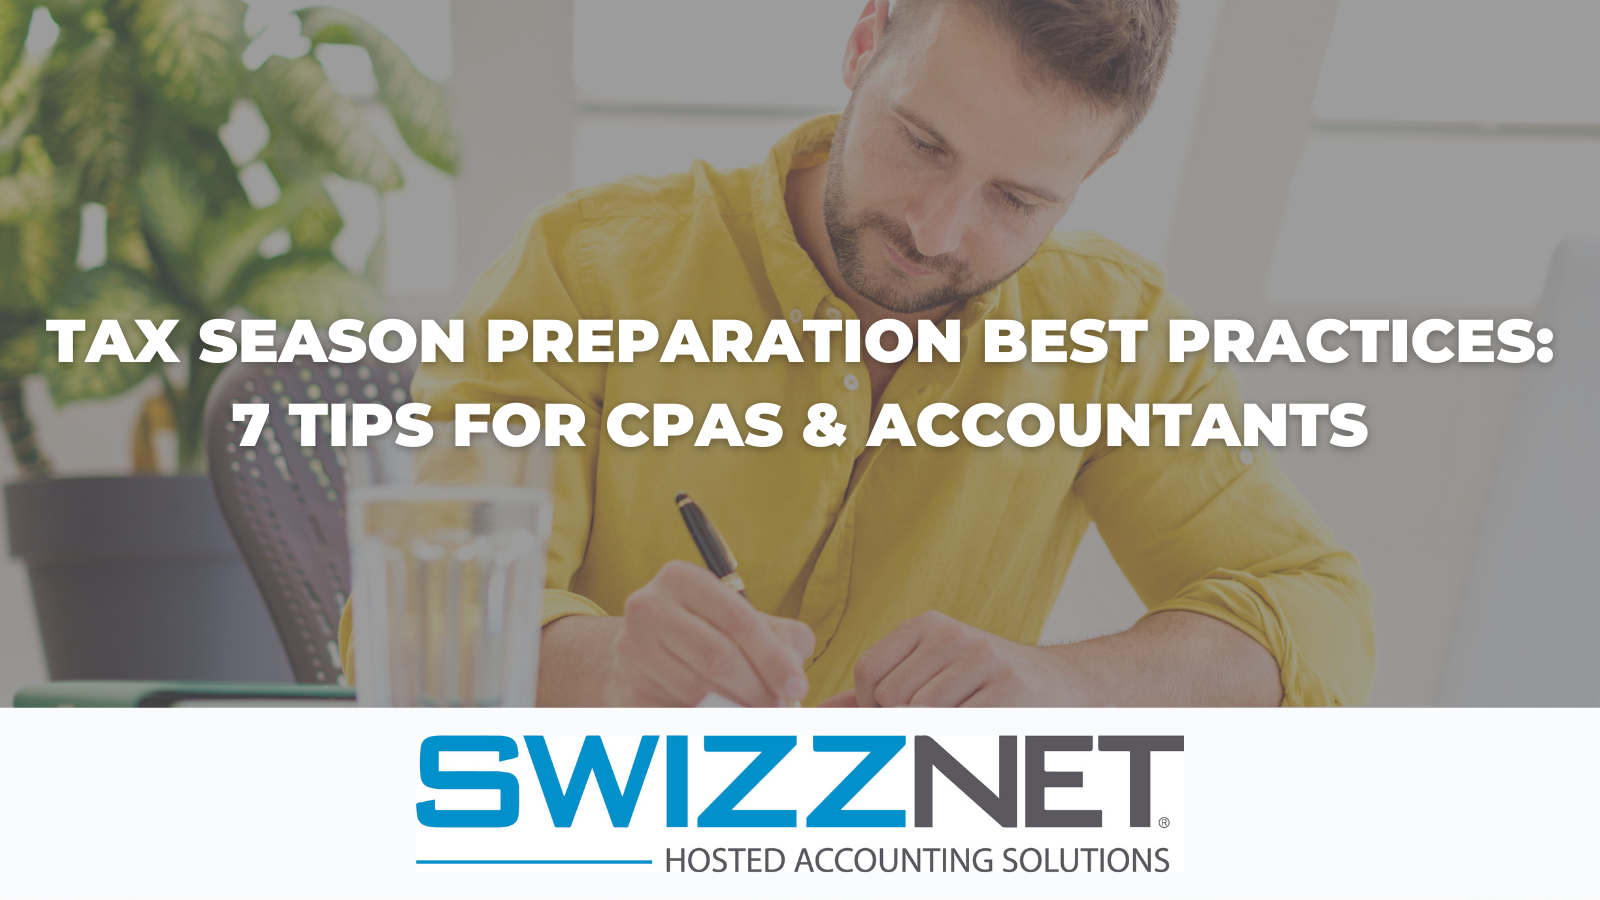 Tax Season Preparation Best Practices: 7 Tips for CPAs & Accountants